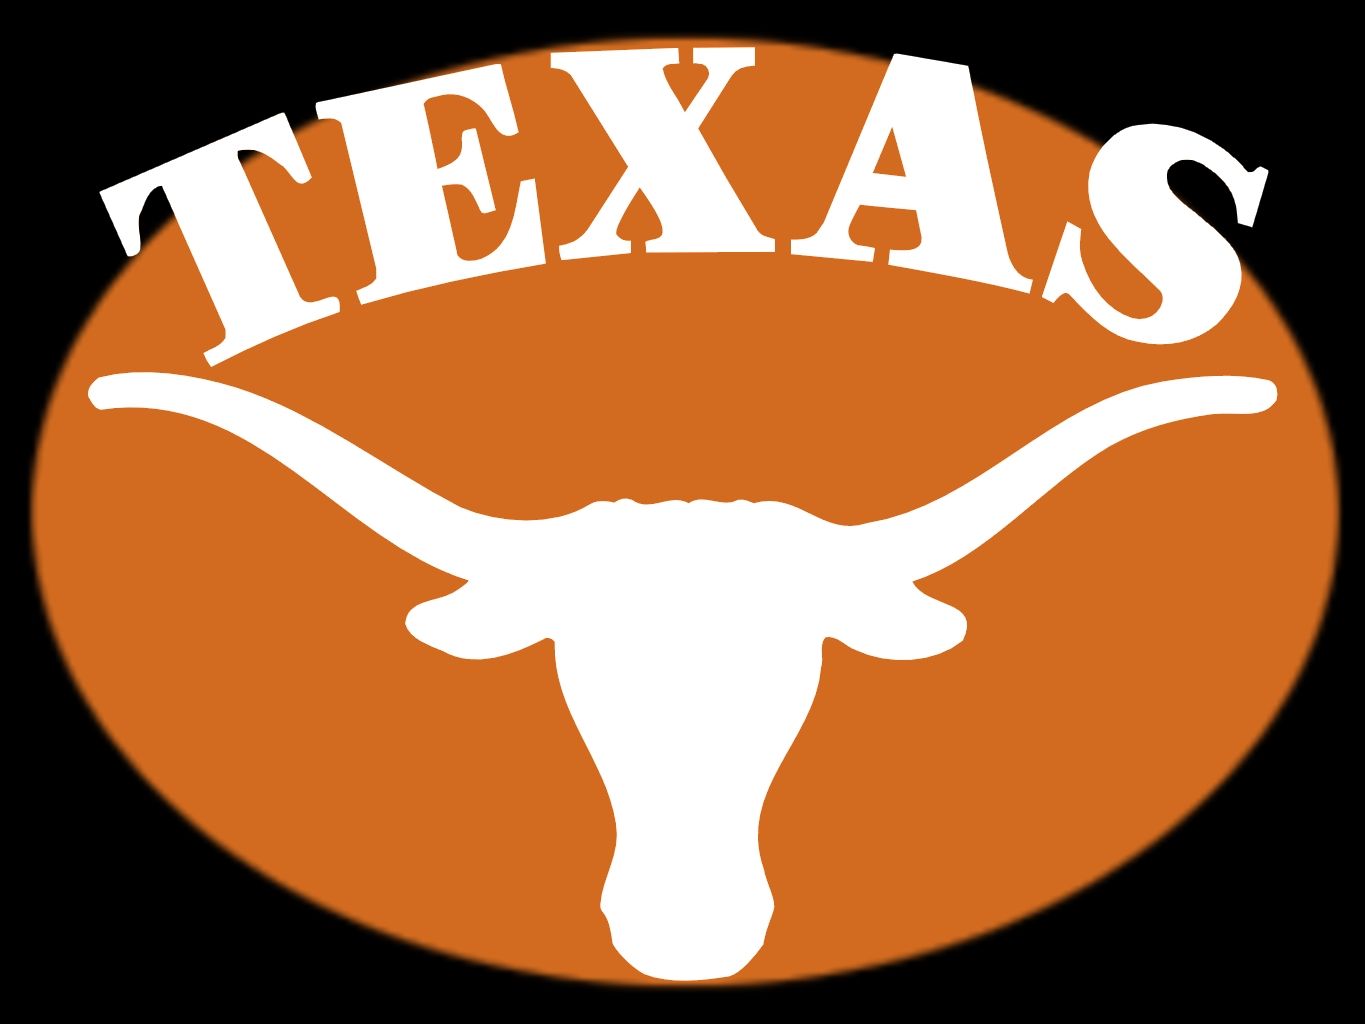 Free download Cool Texas Longhorn Logo Made PC Android iPhone and iPad Wallpaper [1365x1024] for your Desktop, Mobile & Tablet. Explore Texas Longhorn Wallpaper. Longhorn Wallpaper, Texas Rangers